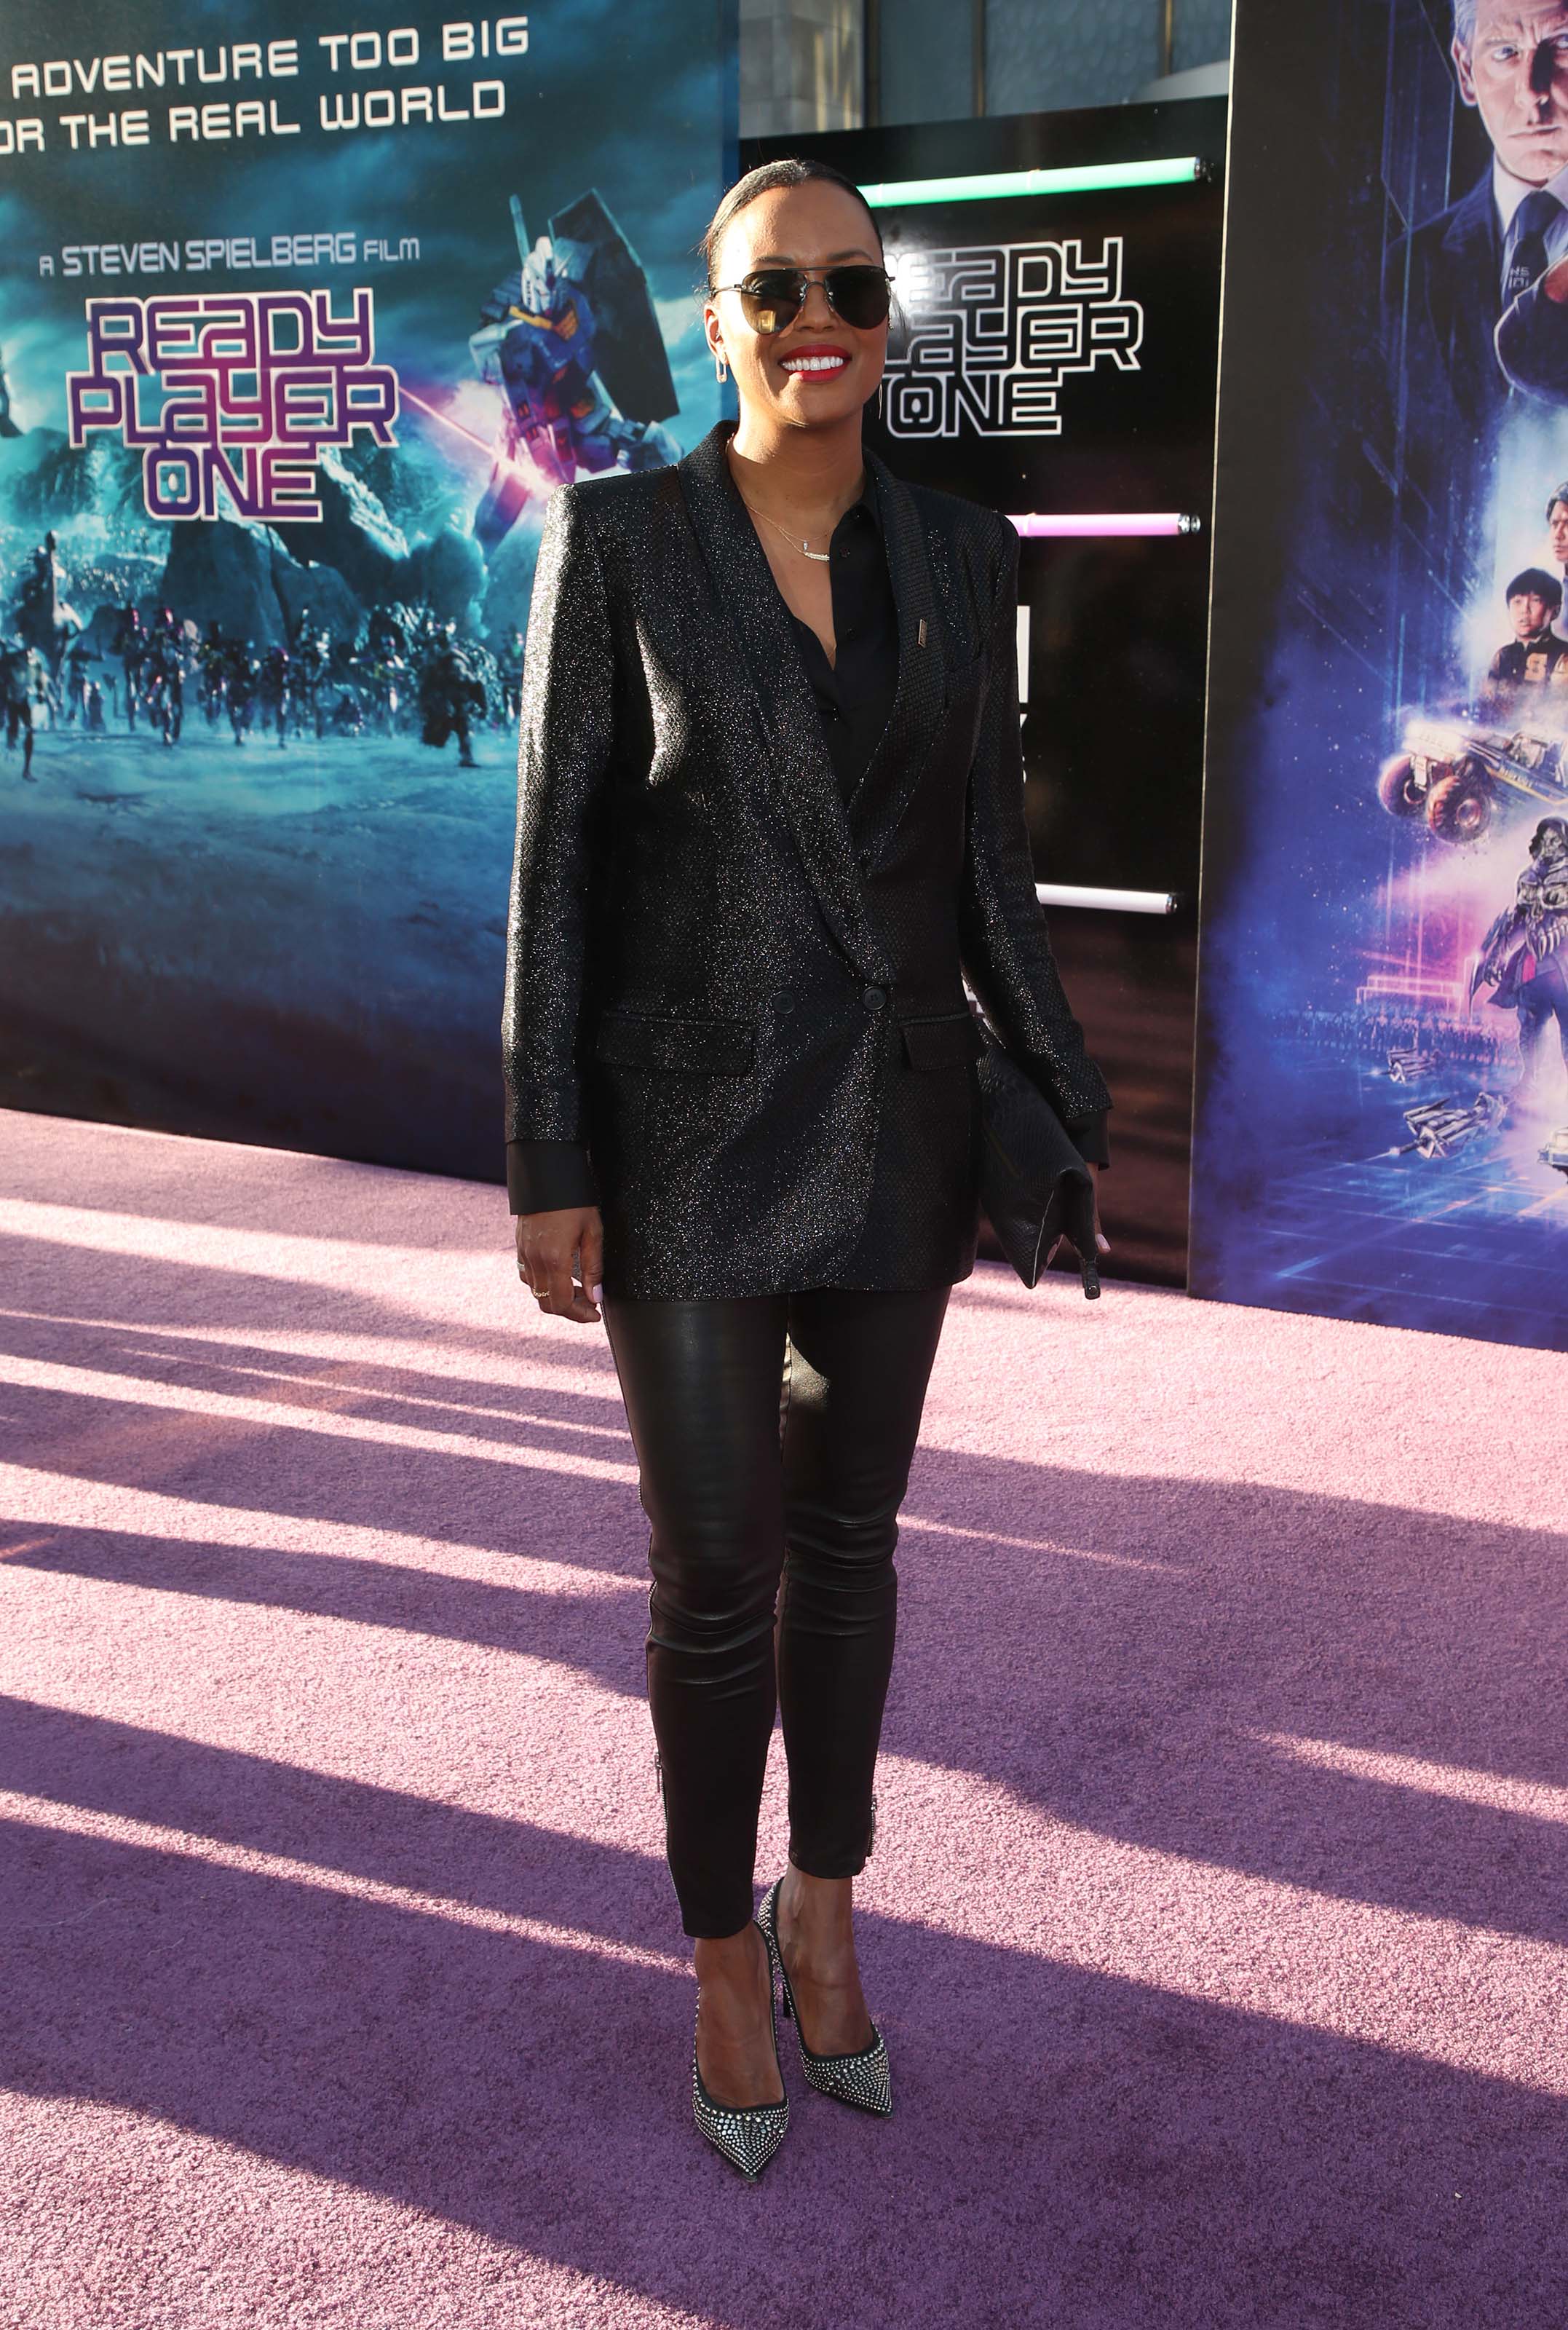 Aisha Tyler attends Ready Player One film premiere